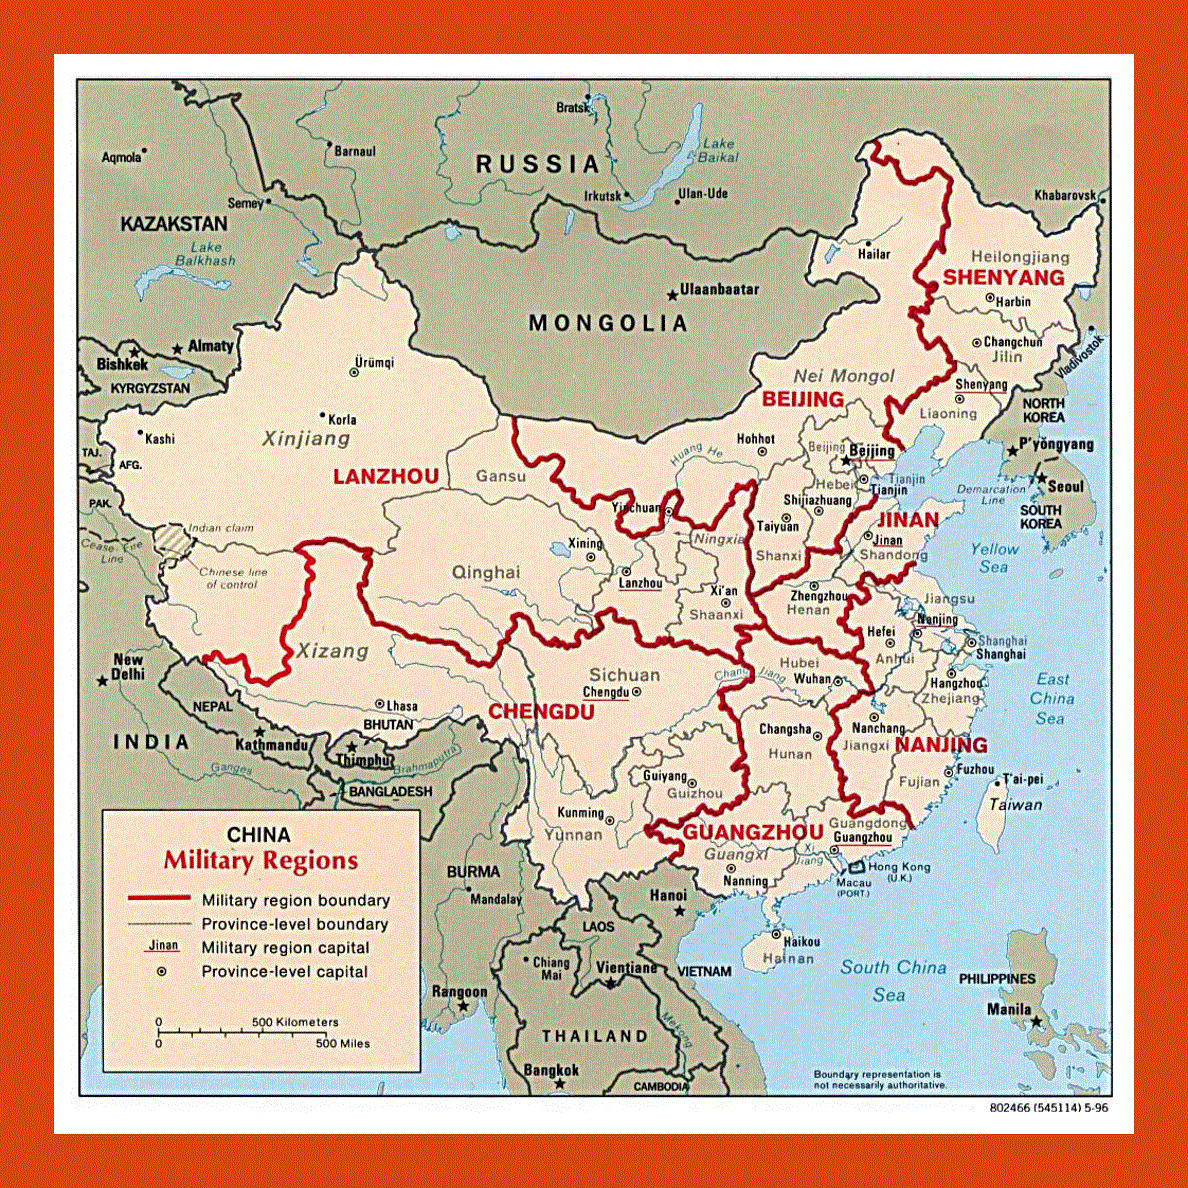 Military regions map of China - 1996